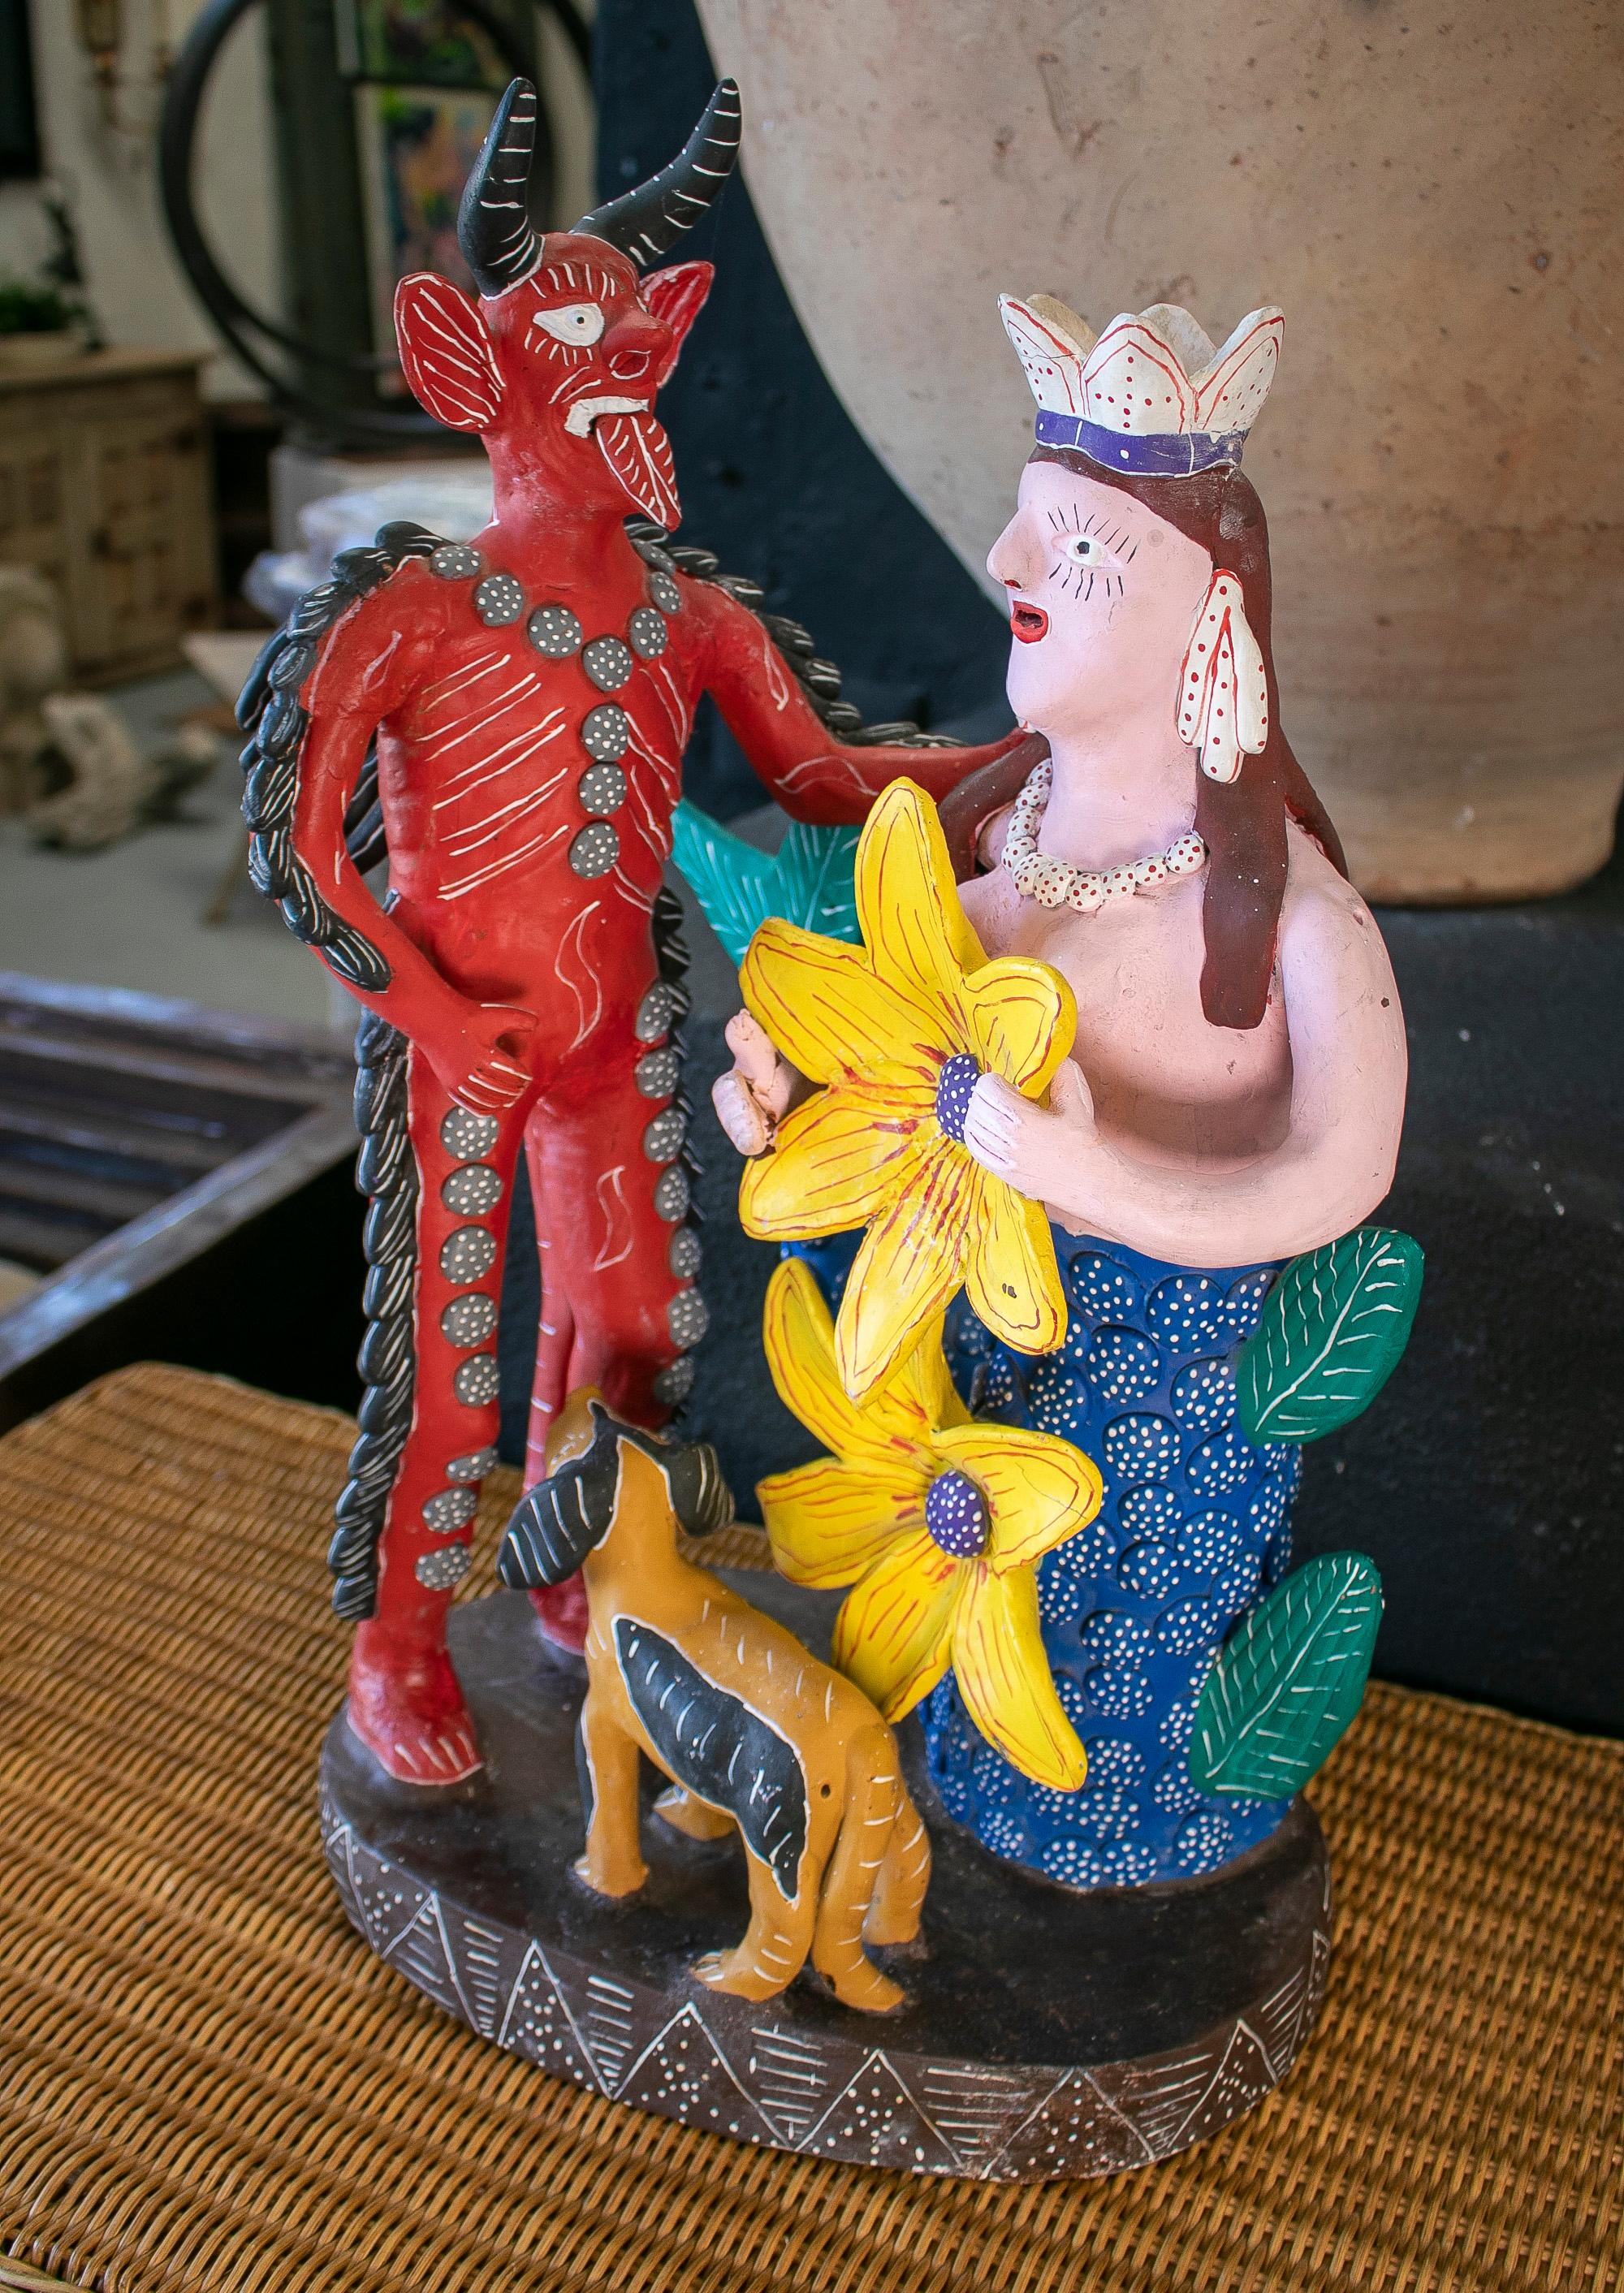 Colourful Mexican handmade Terracotta sculpture with demon and mermaid figures.